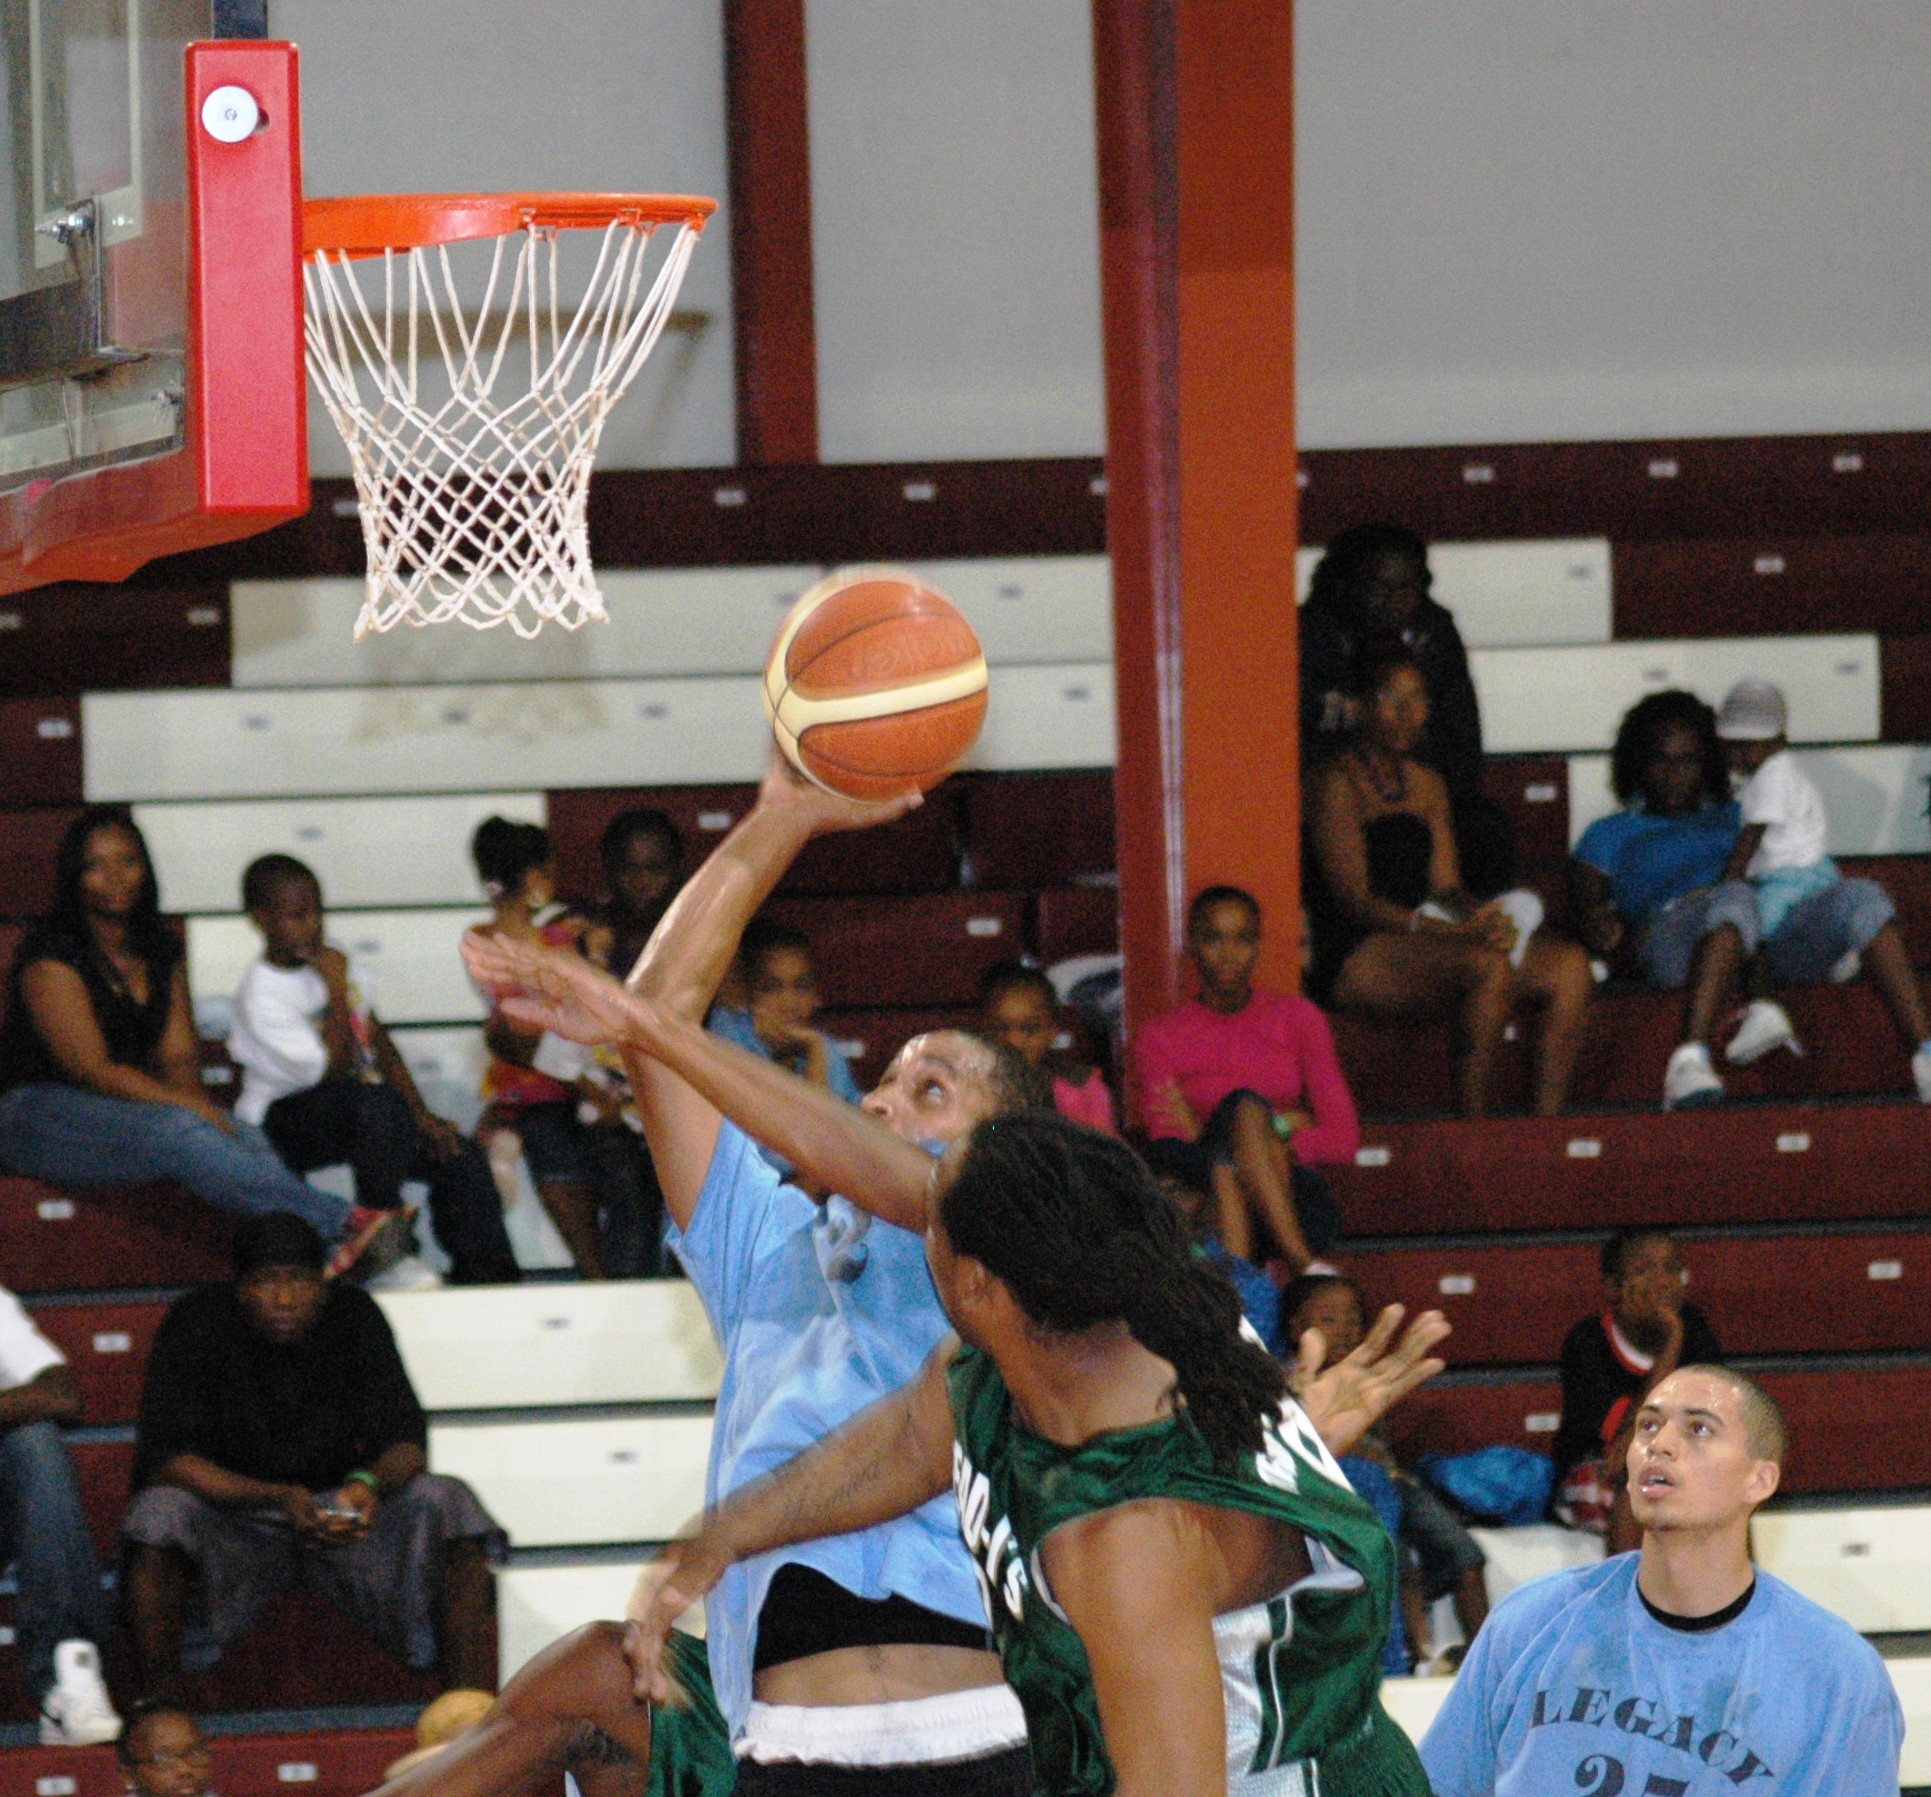 Legacy's Chris Sealy is hammered by Dread I's Rudolf Simmonds on a drive to the basket.